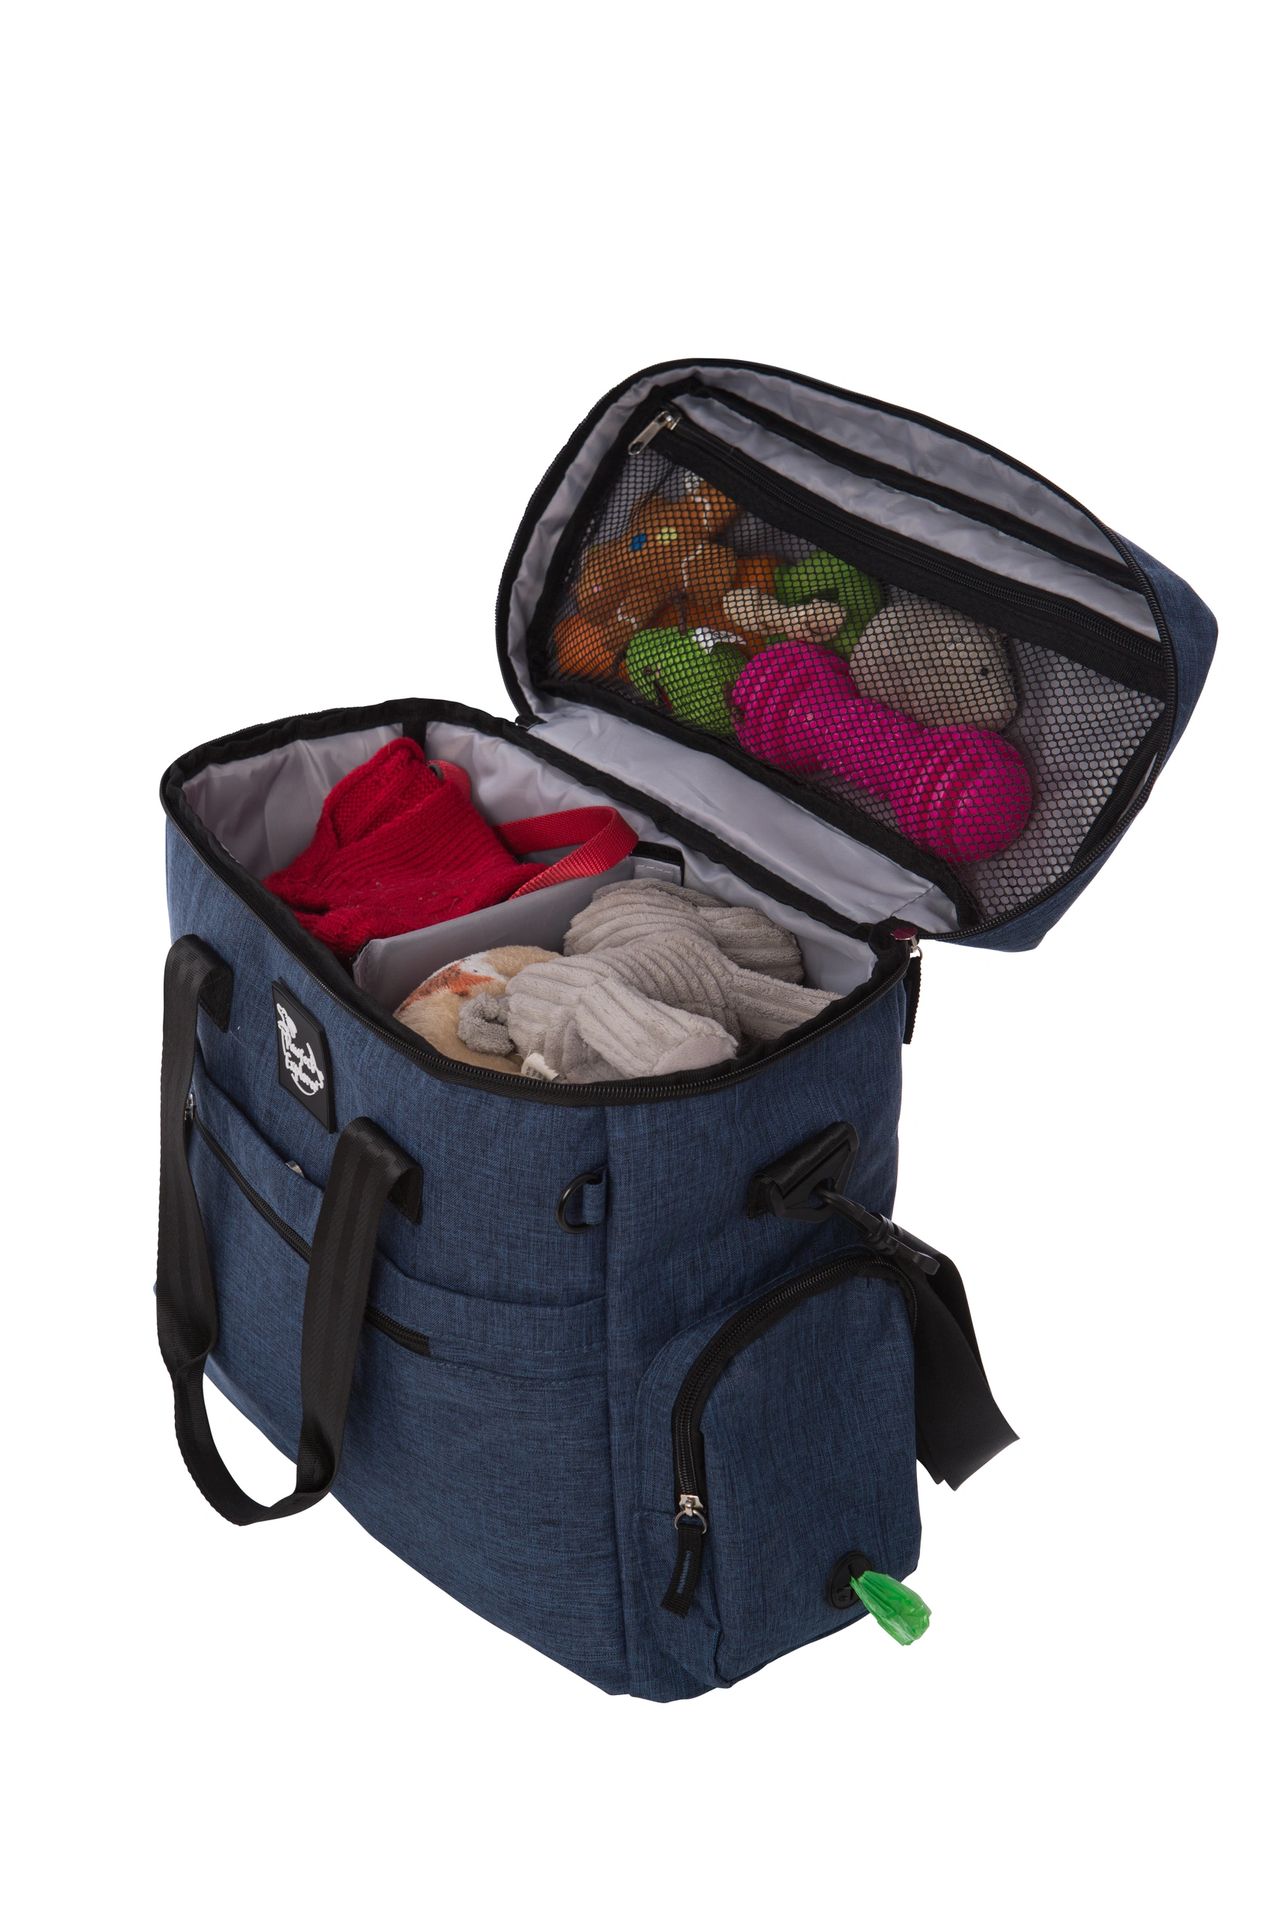 dog travel bag filled with toys, treats, food, blankets, lead, collars